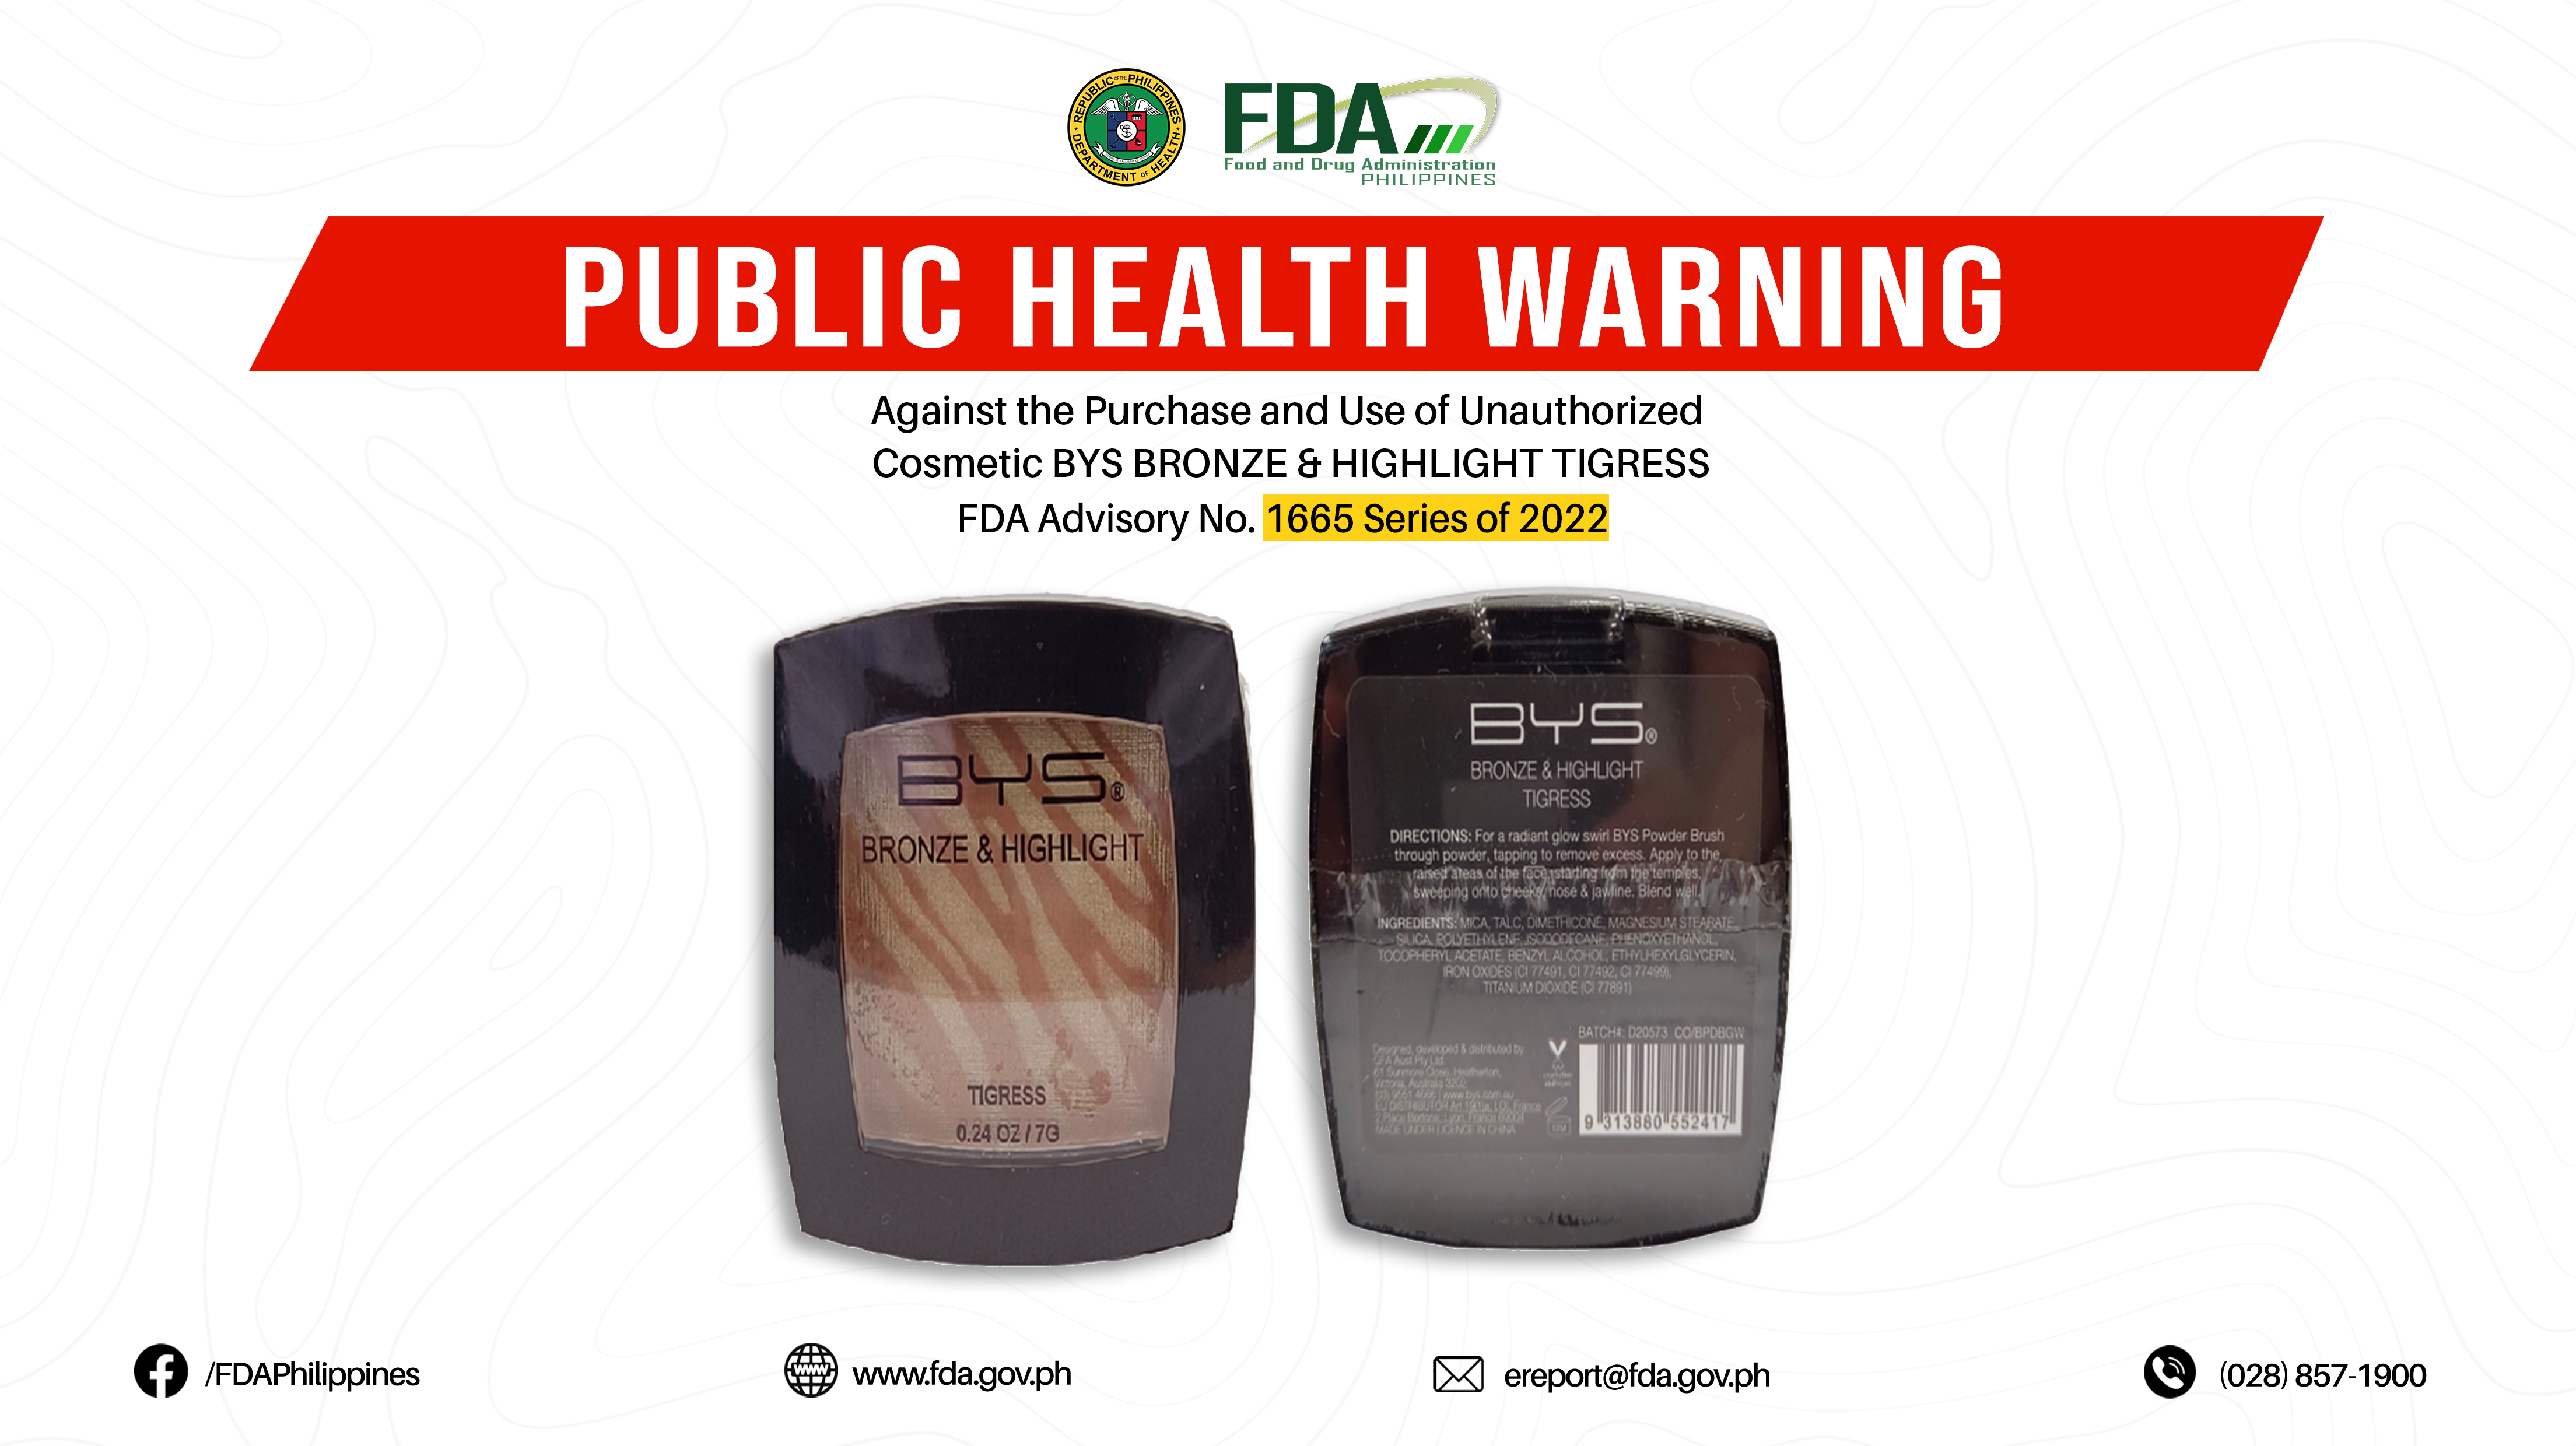 FDA Advisory No.2022-1665 || Public Health Warning Against the Purchase and Use of Unauthorized Cosmetic BYS BRONZE & HIGHLIGHT TIGRESS